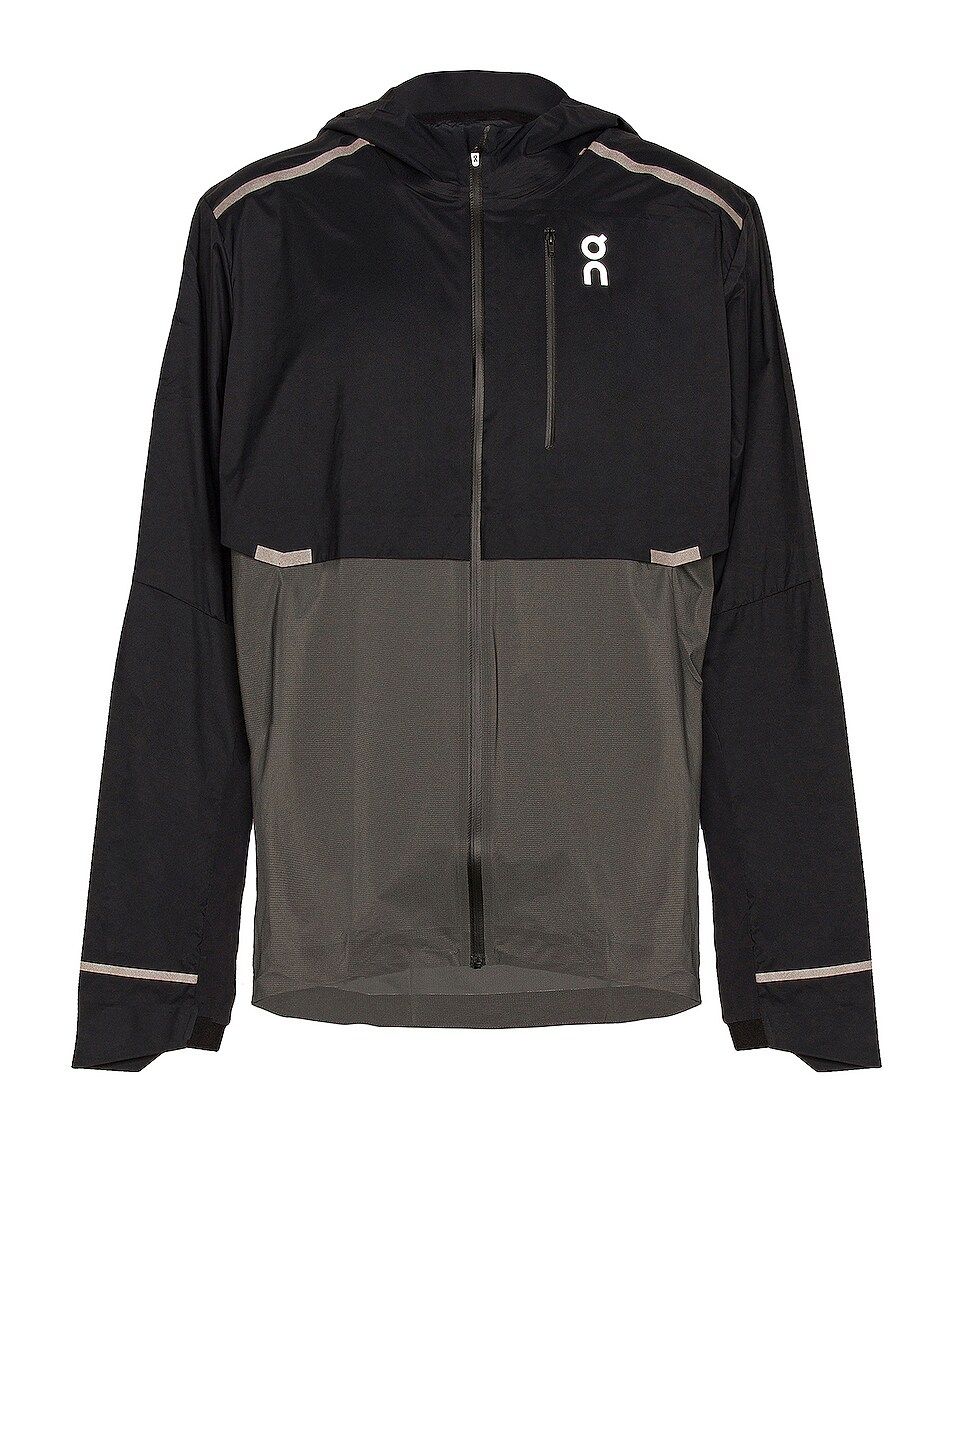 Image 1 of On Weather Jacket in Black & Shadow